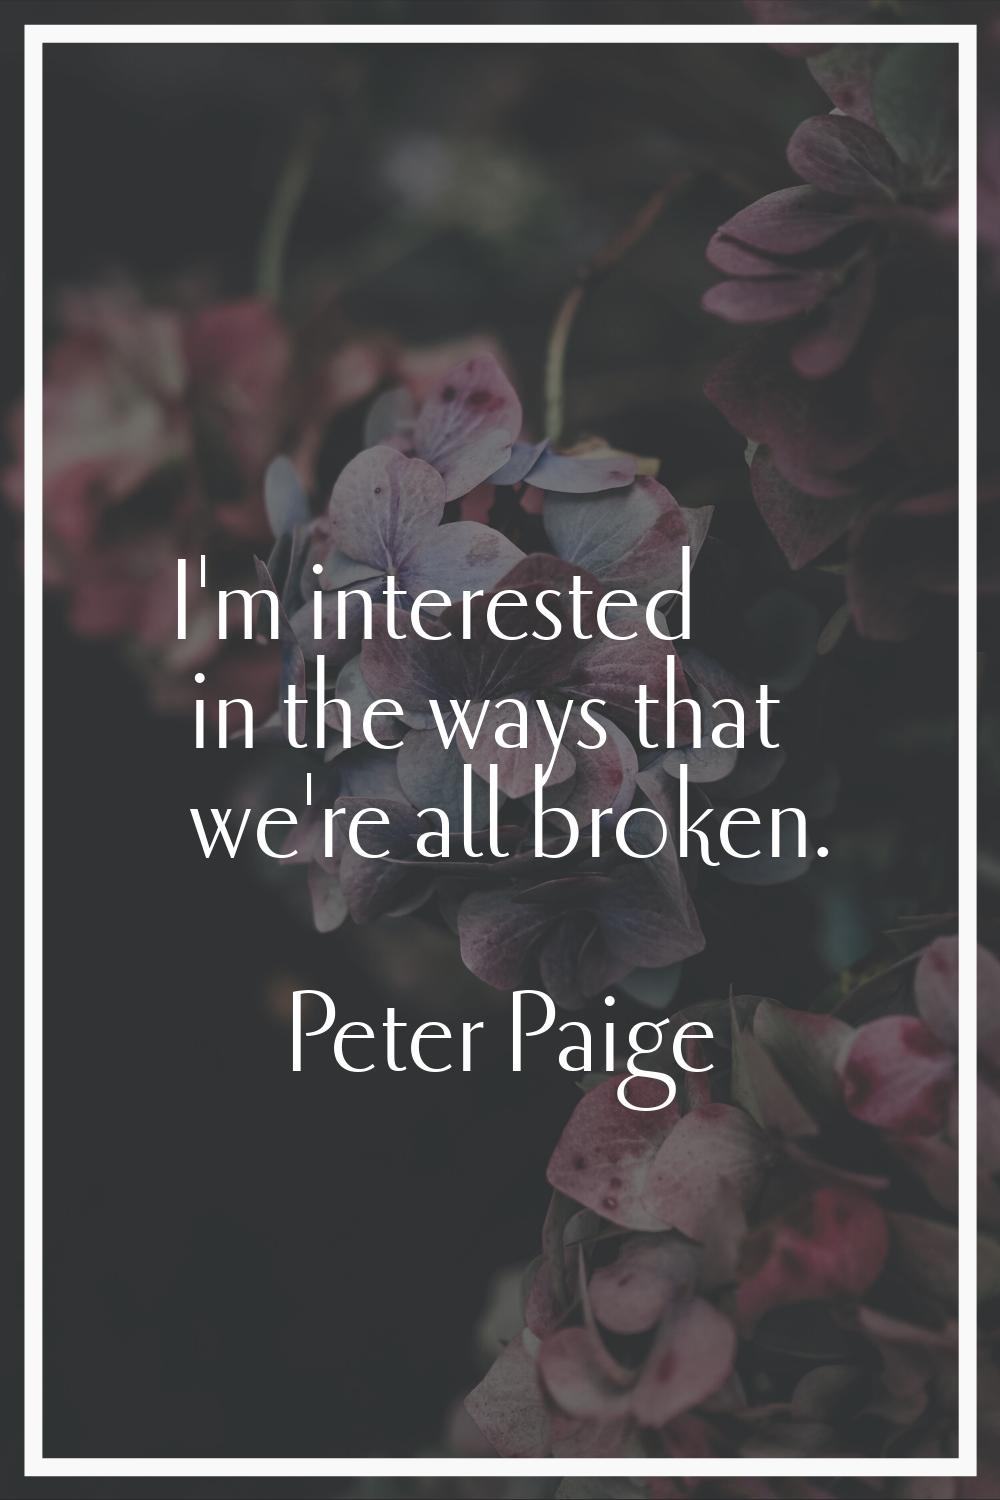 I'm interested in the ways that we're all broken.